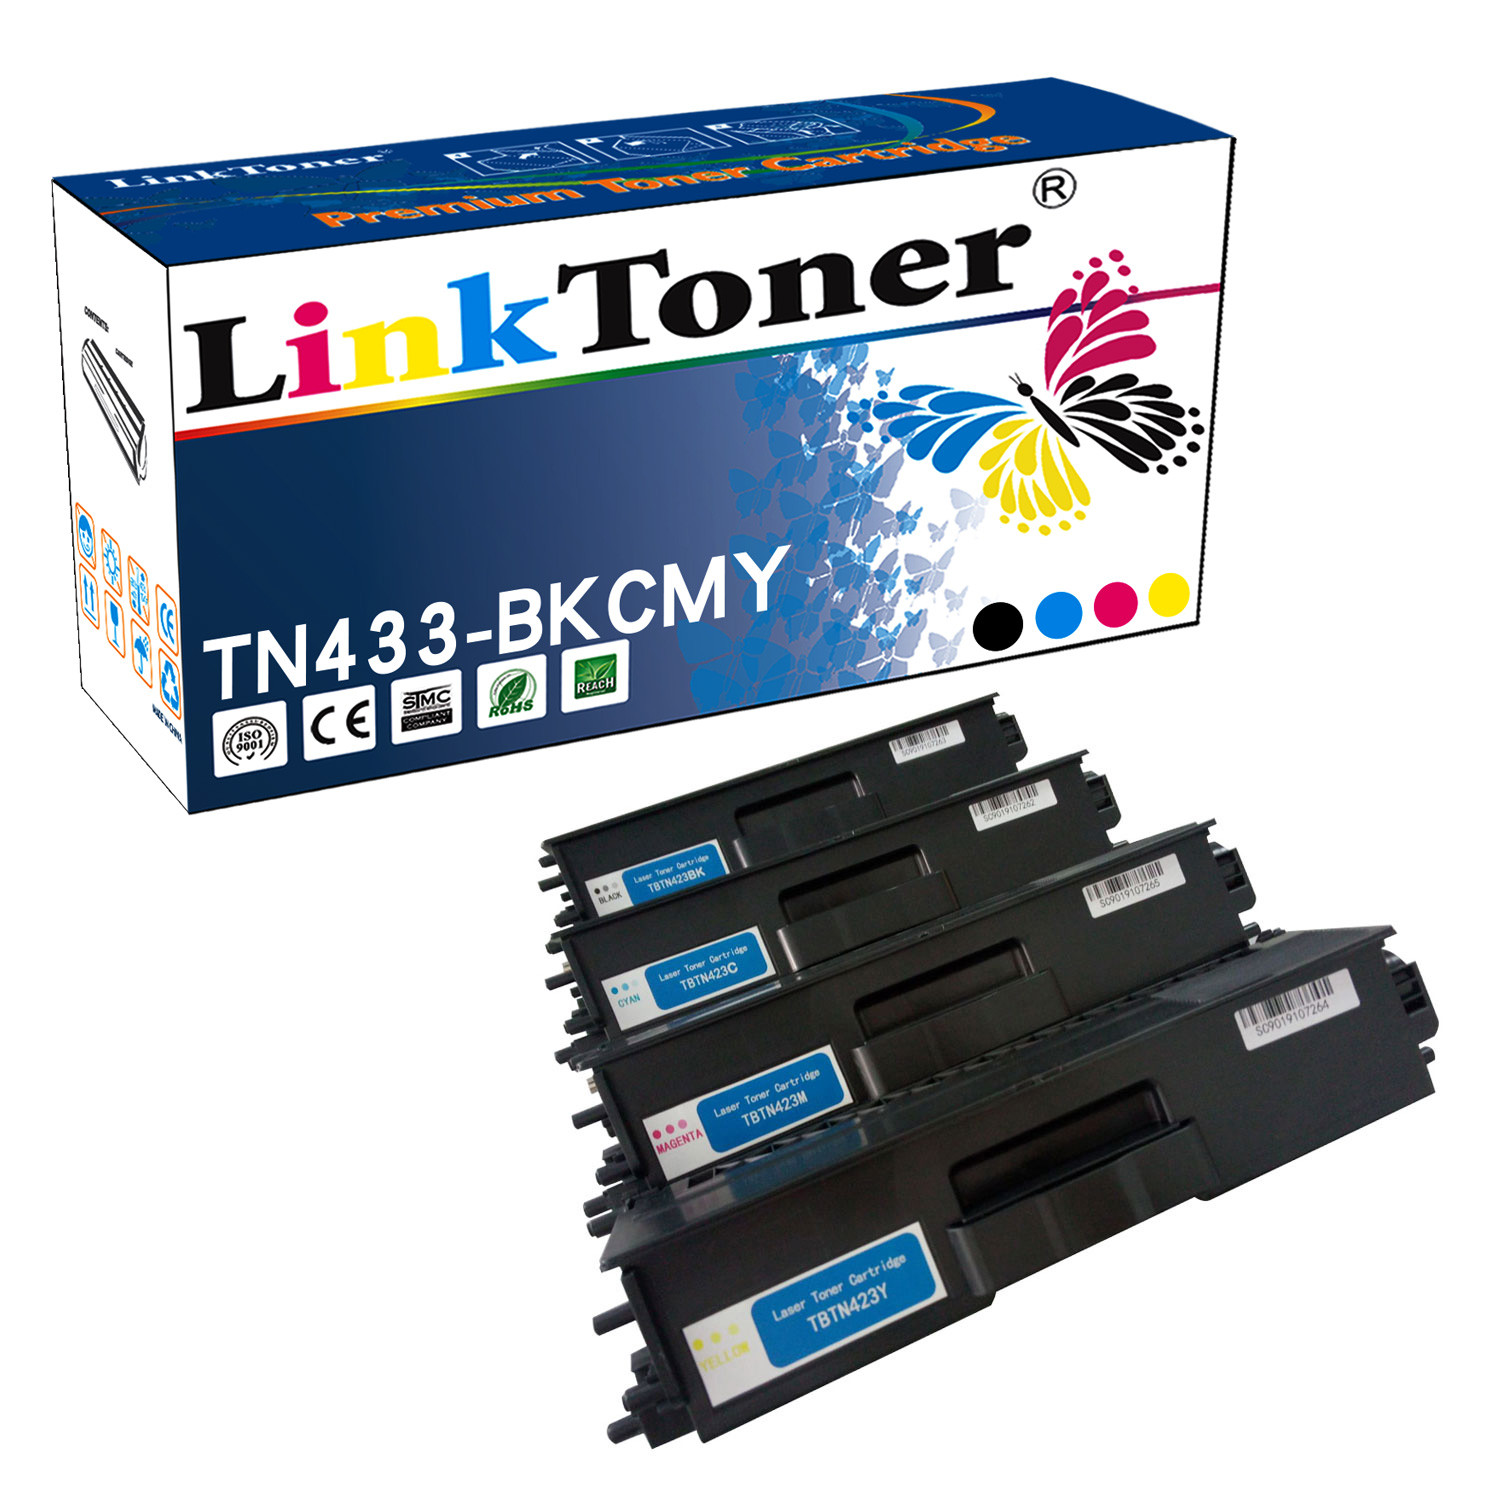 Compatible Brother TN423 Yellow Toner Cartridge